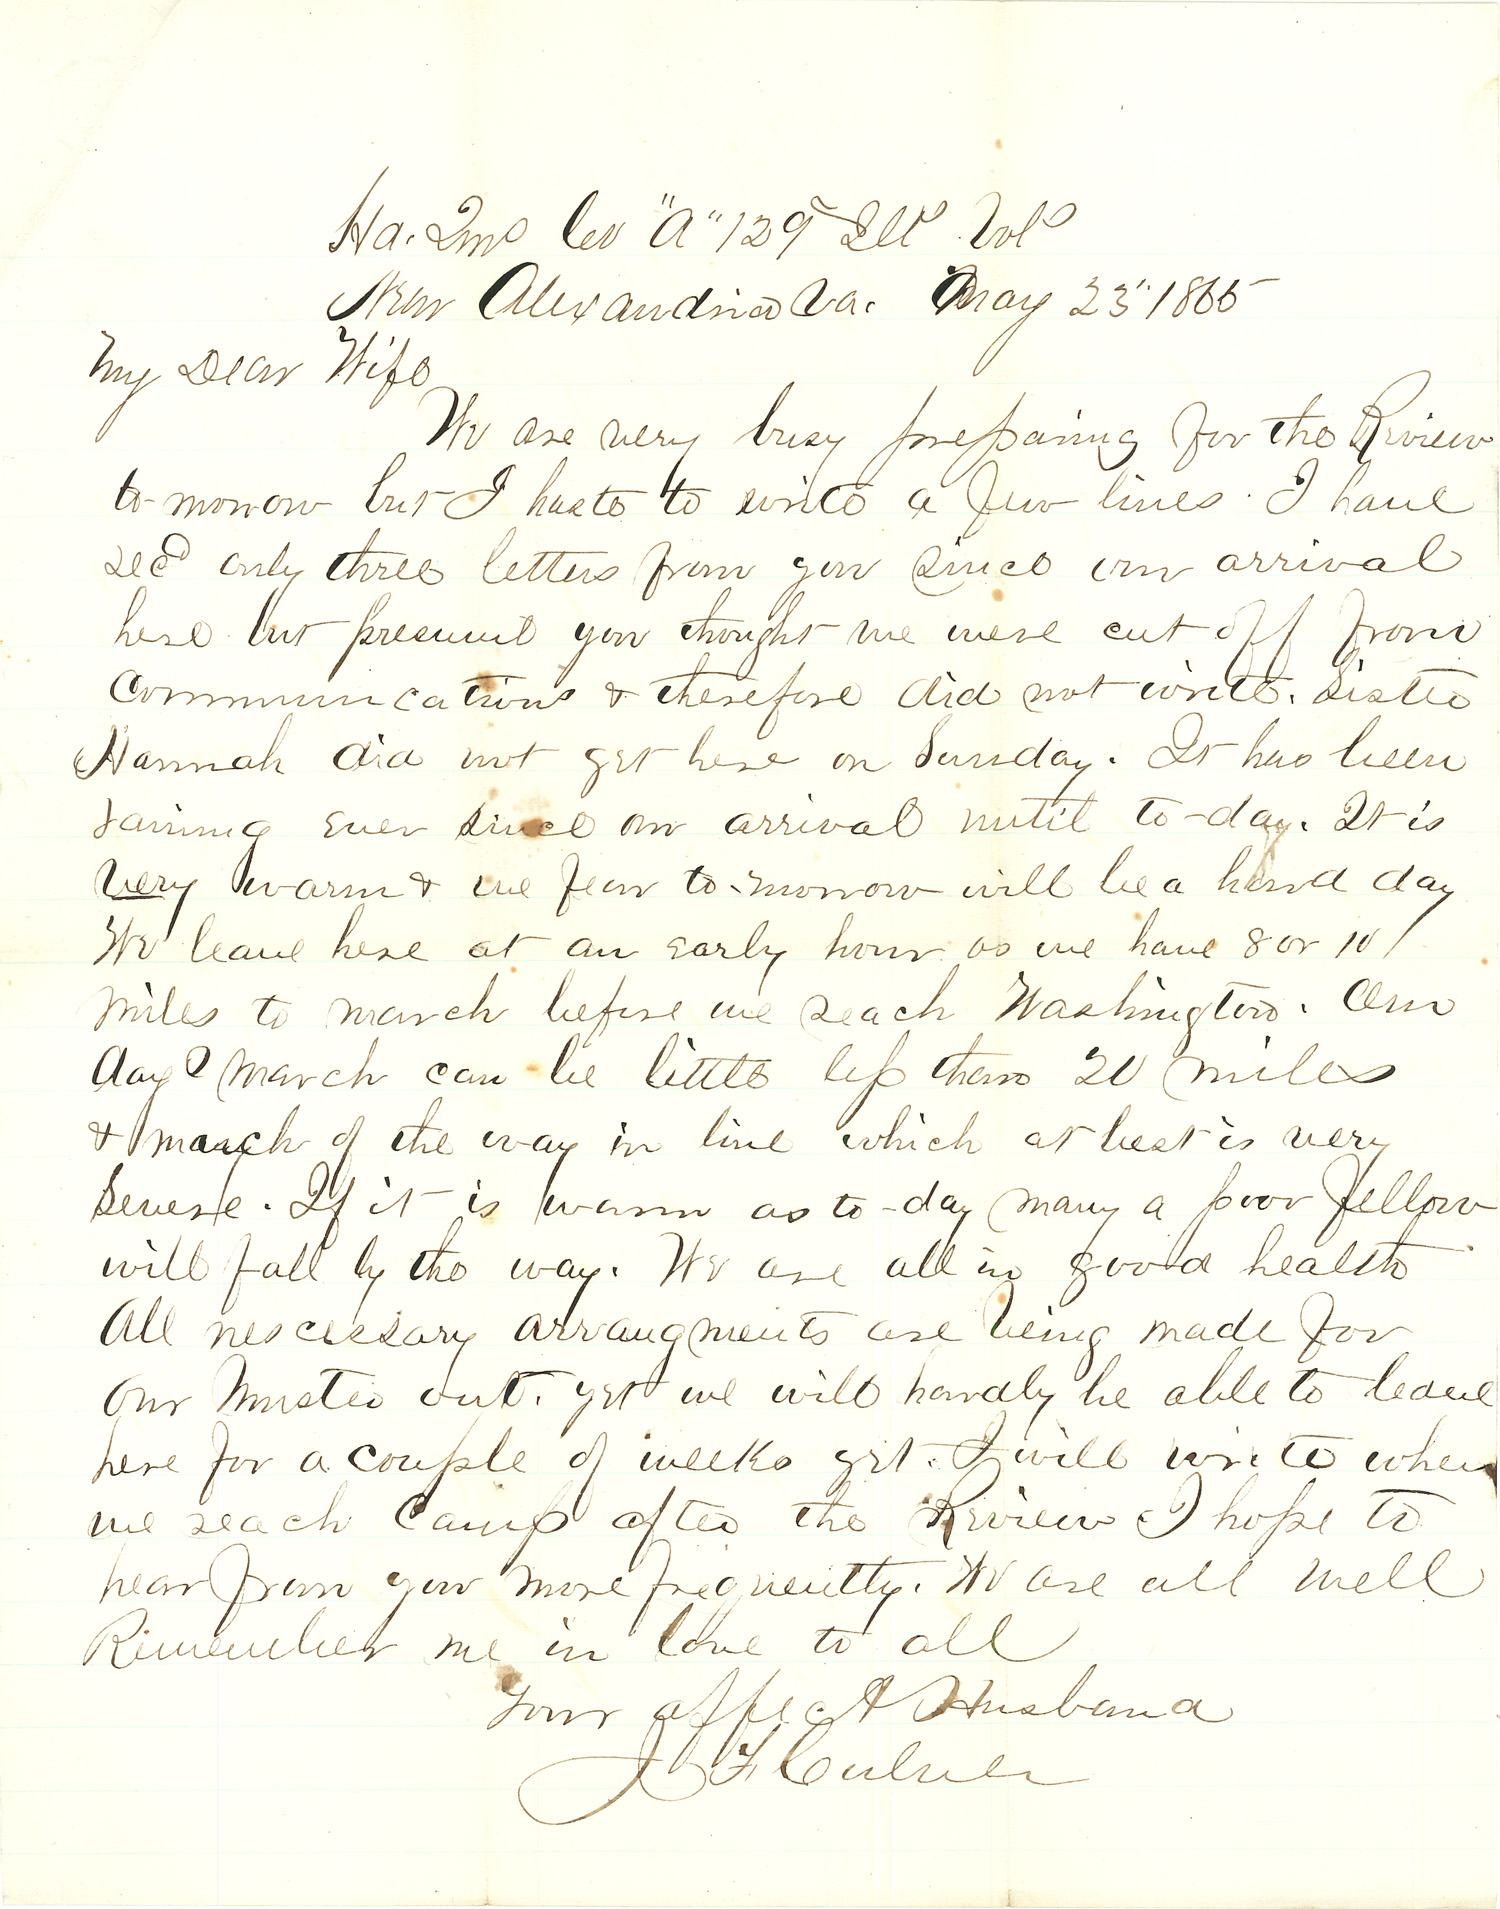 Joseph Culver Letter, May 23, 1865, Page 1